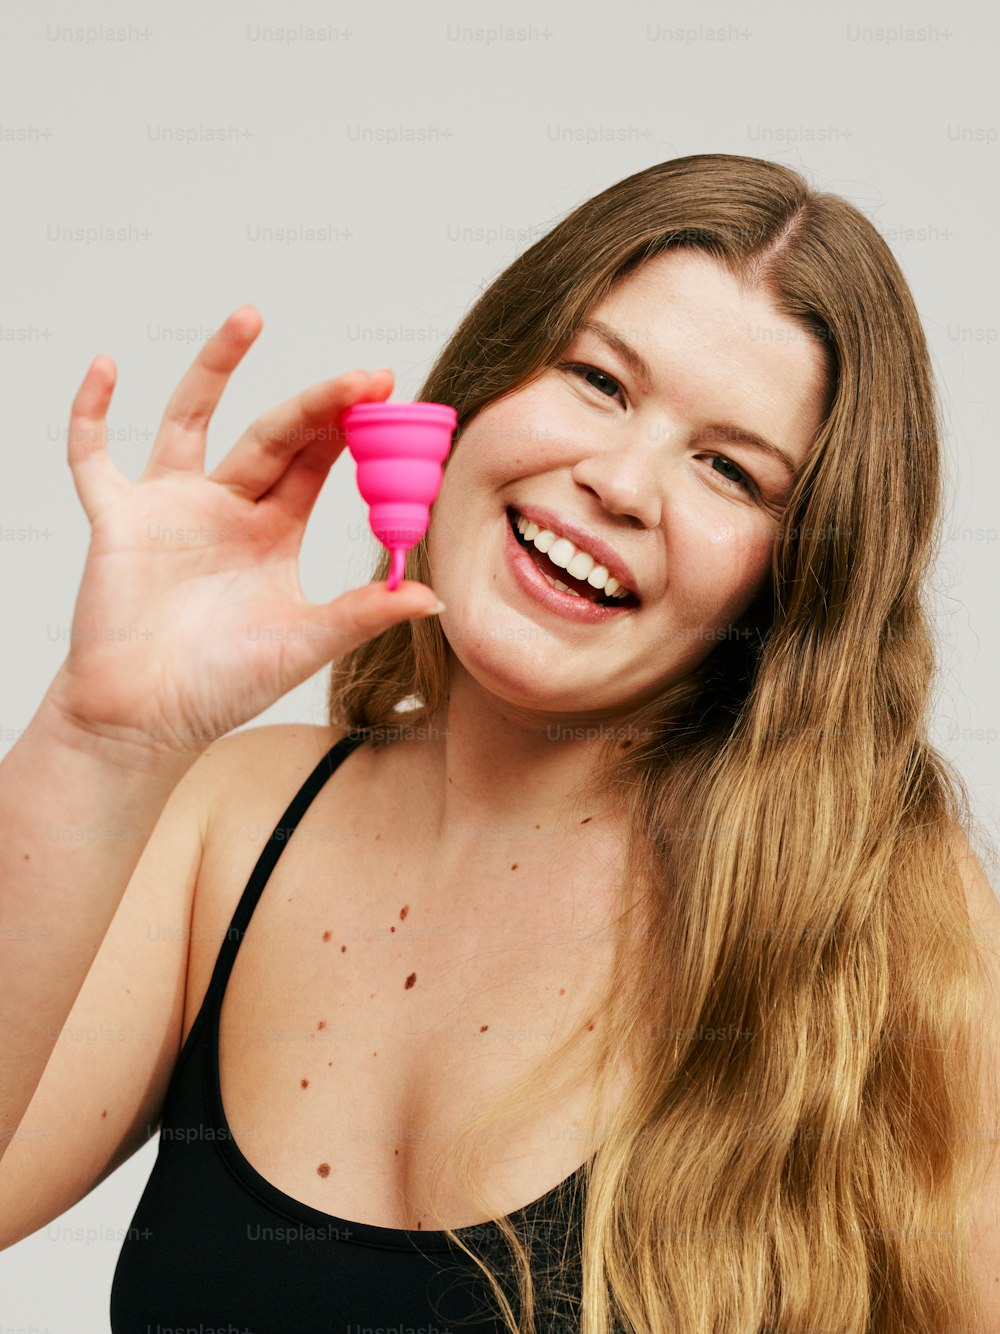 a woman holding a pink object up to her face